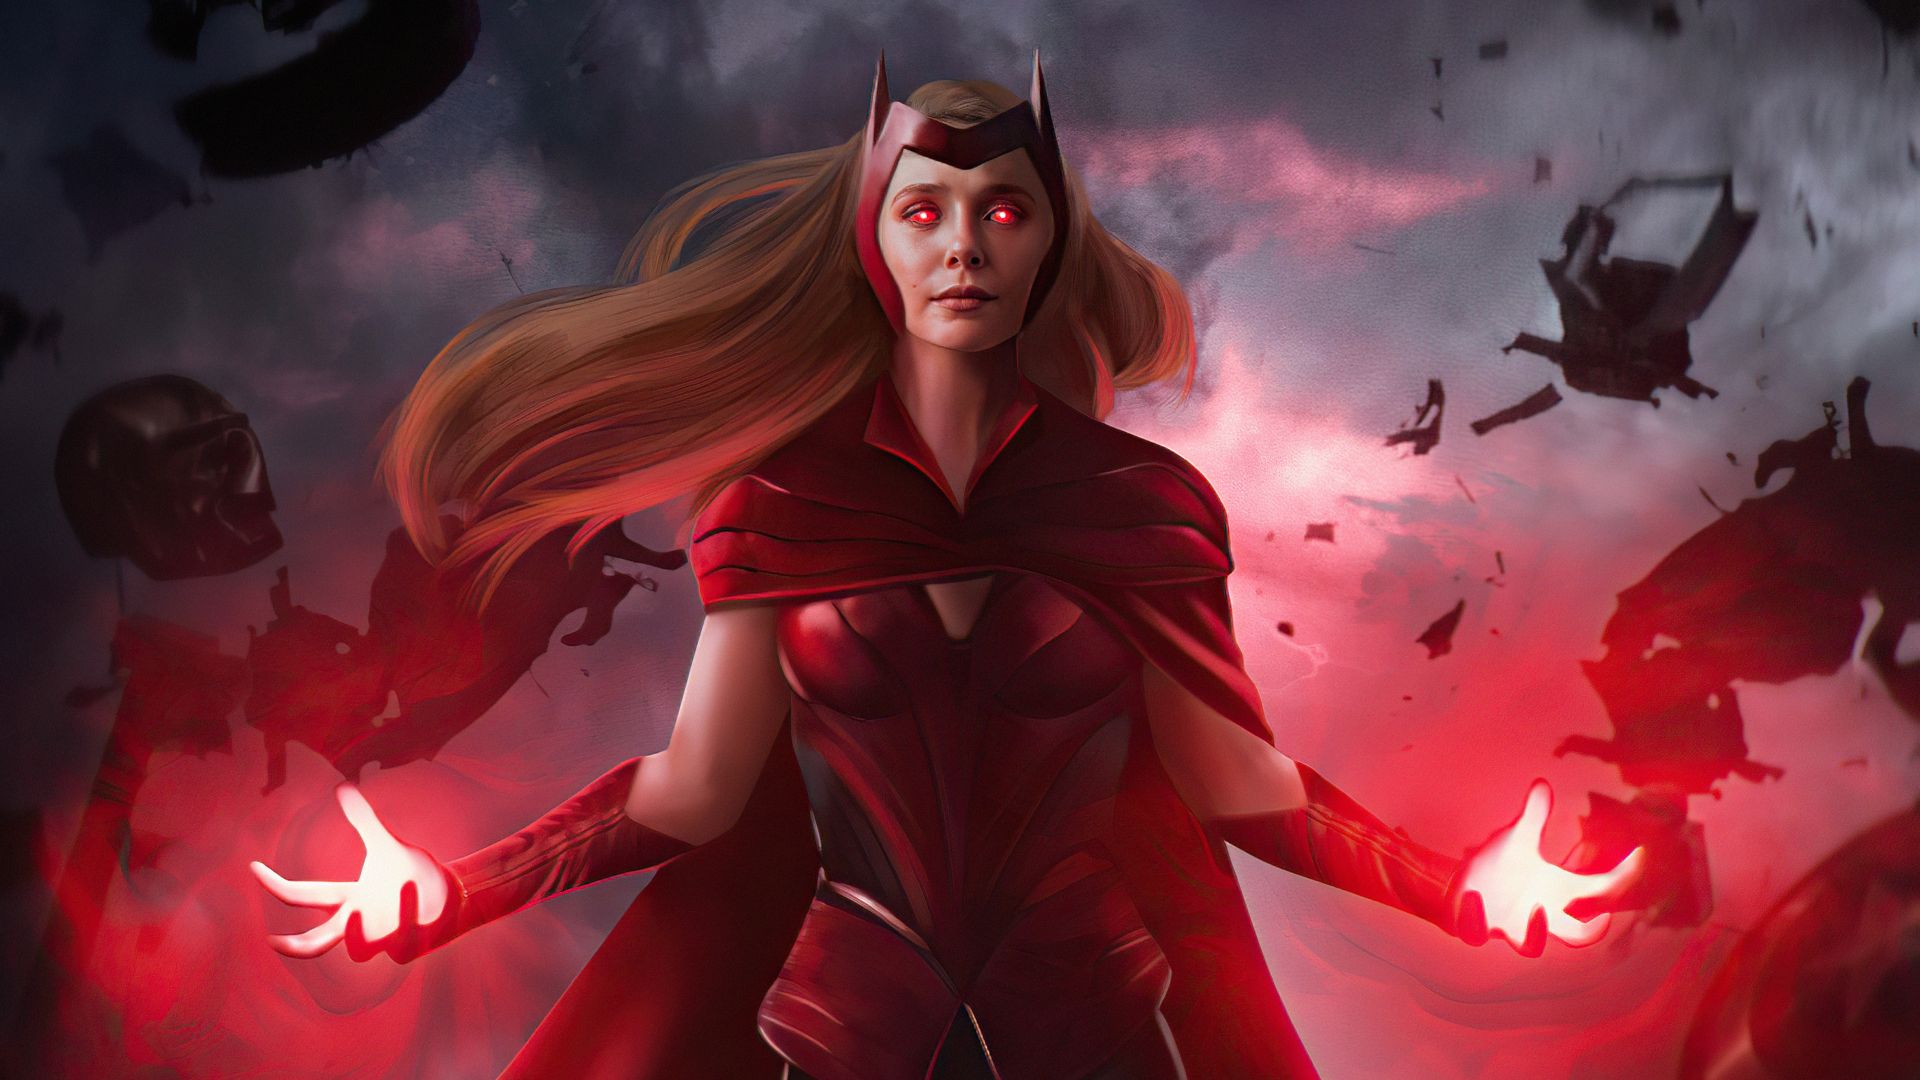 The Scarlet Witch Wallpapers - Wallpaper Cave.